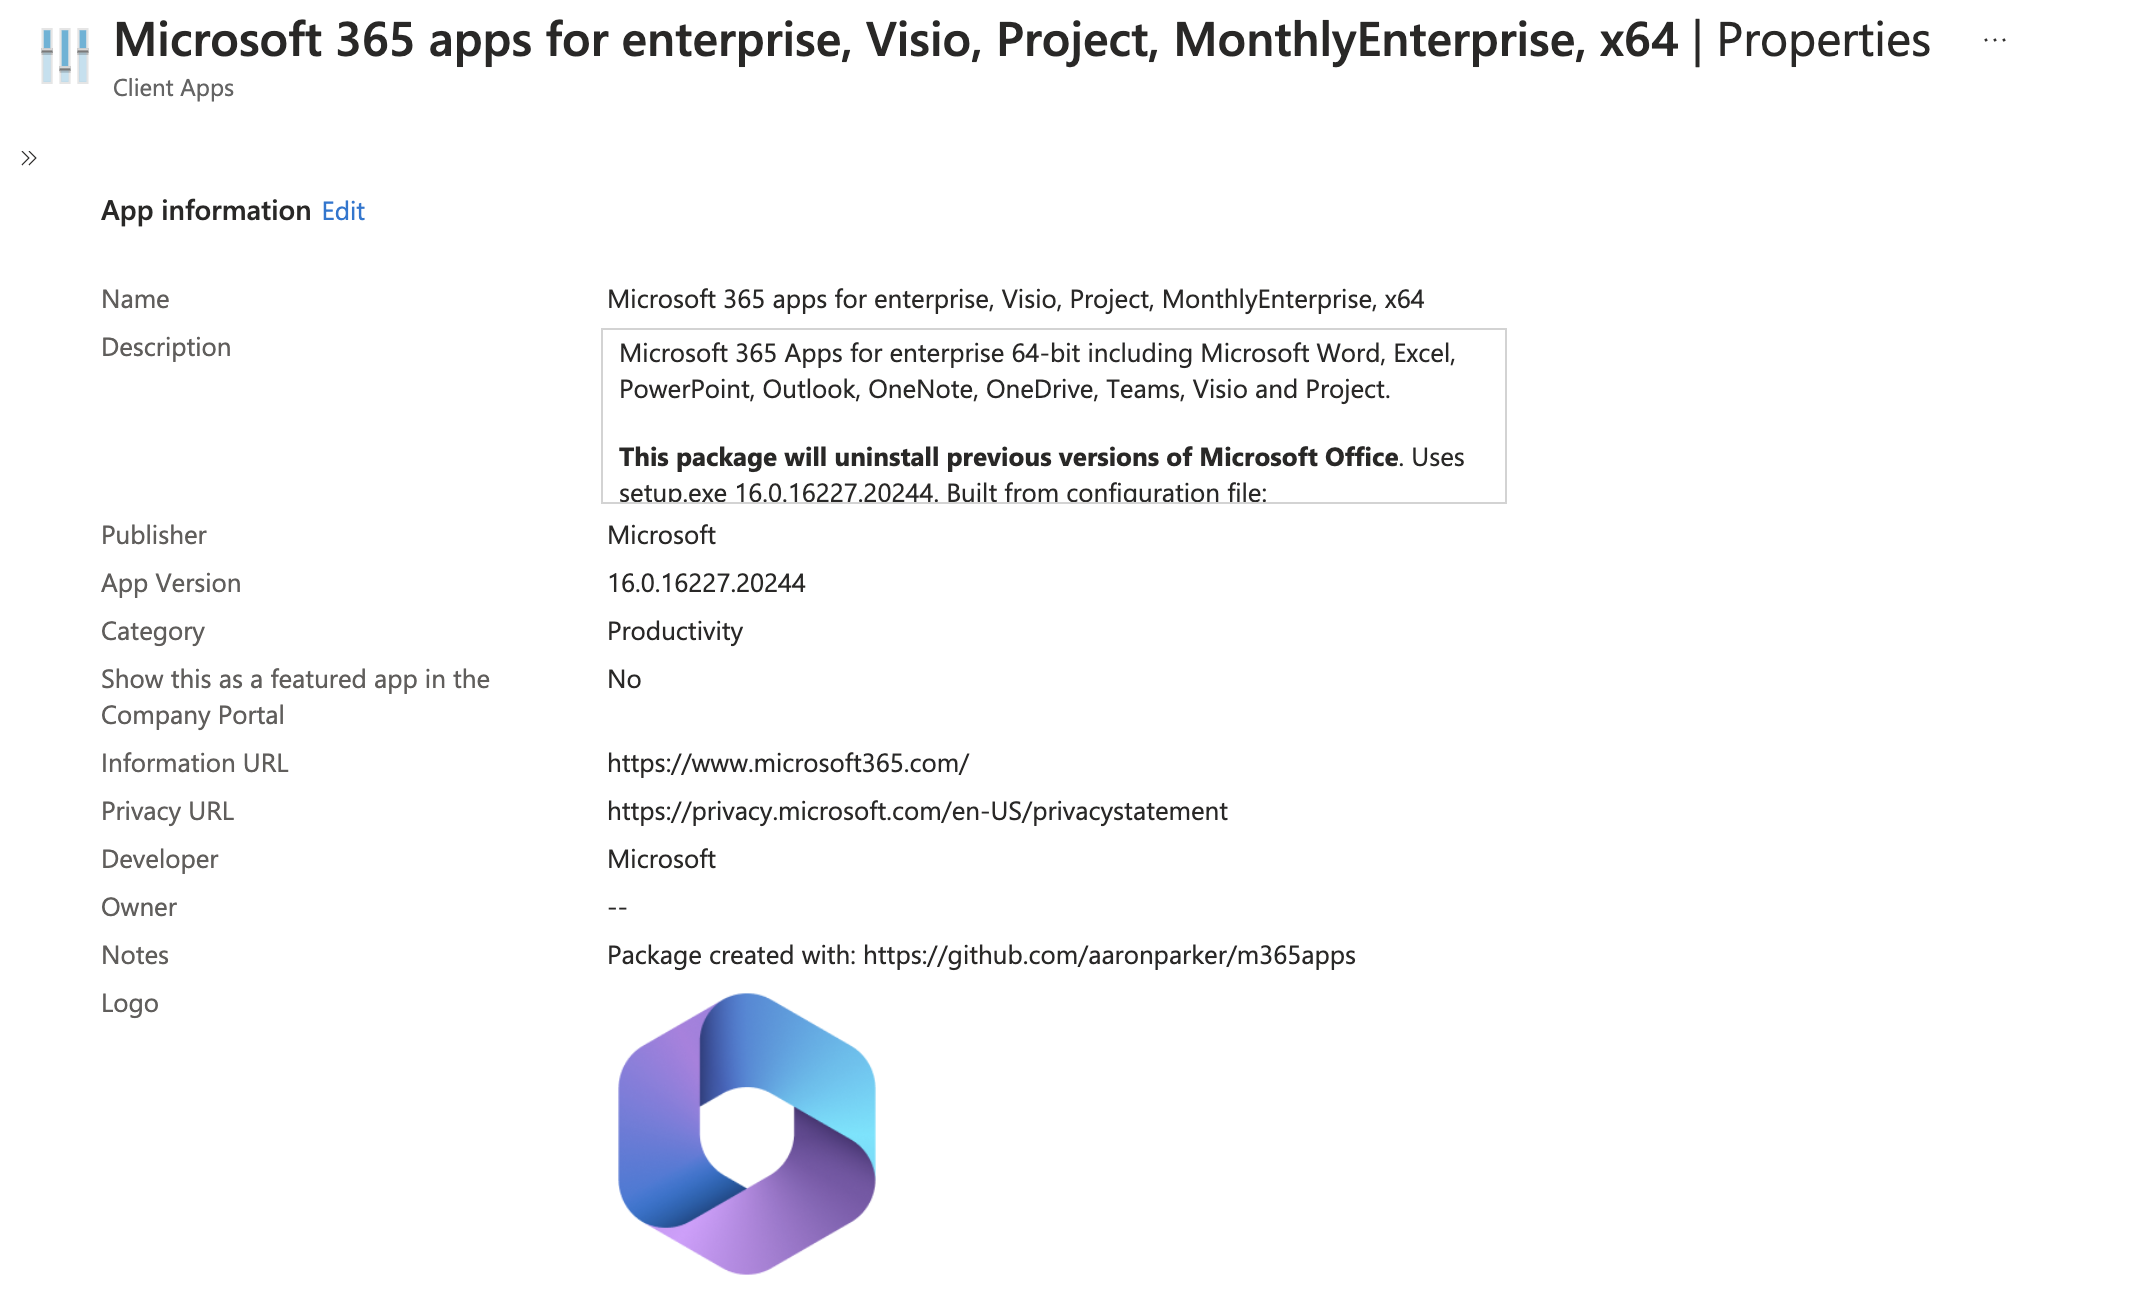 The Microsoft 365 Apps package imported into Intune